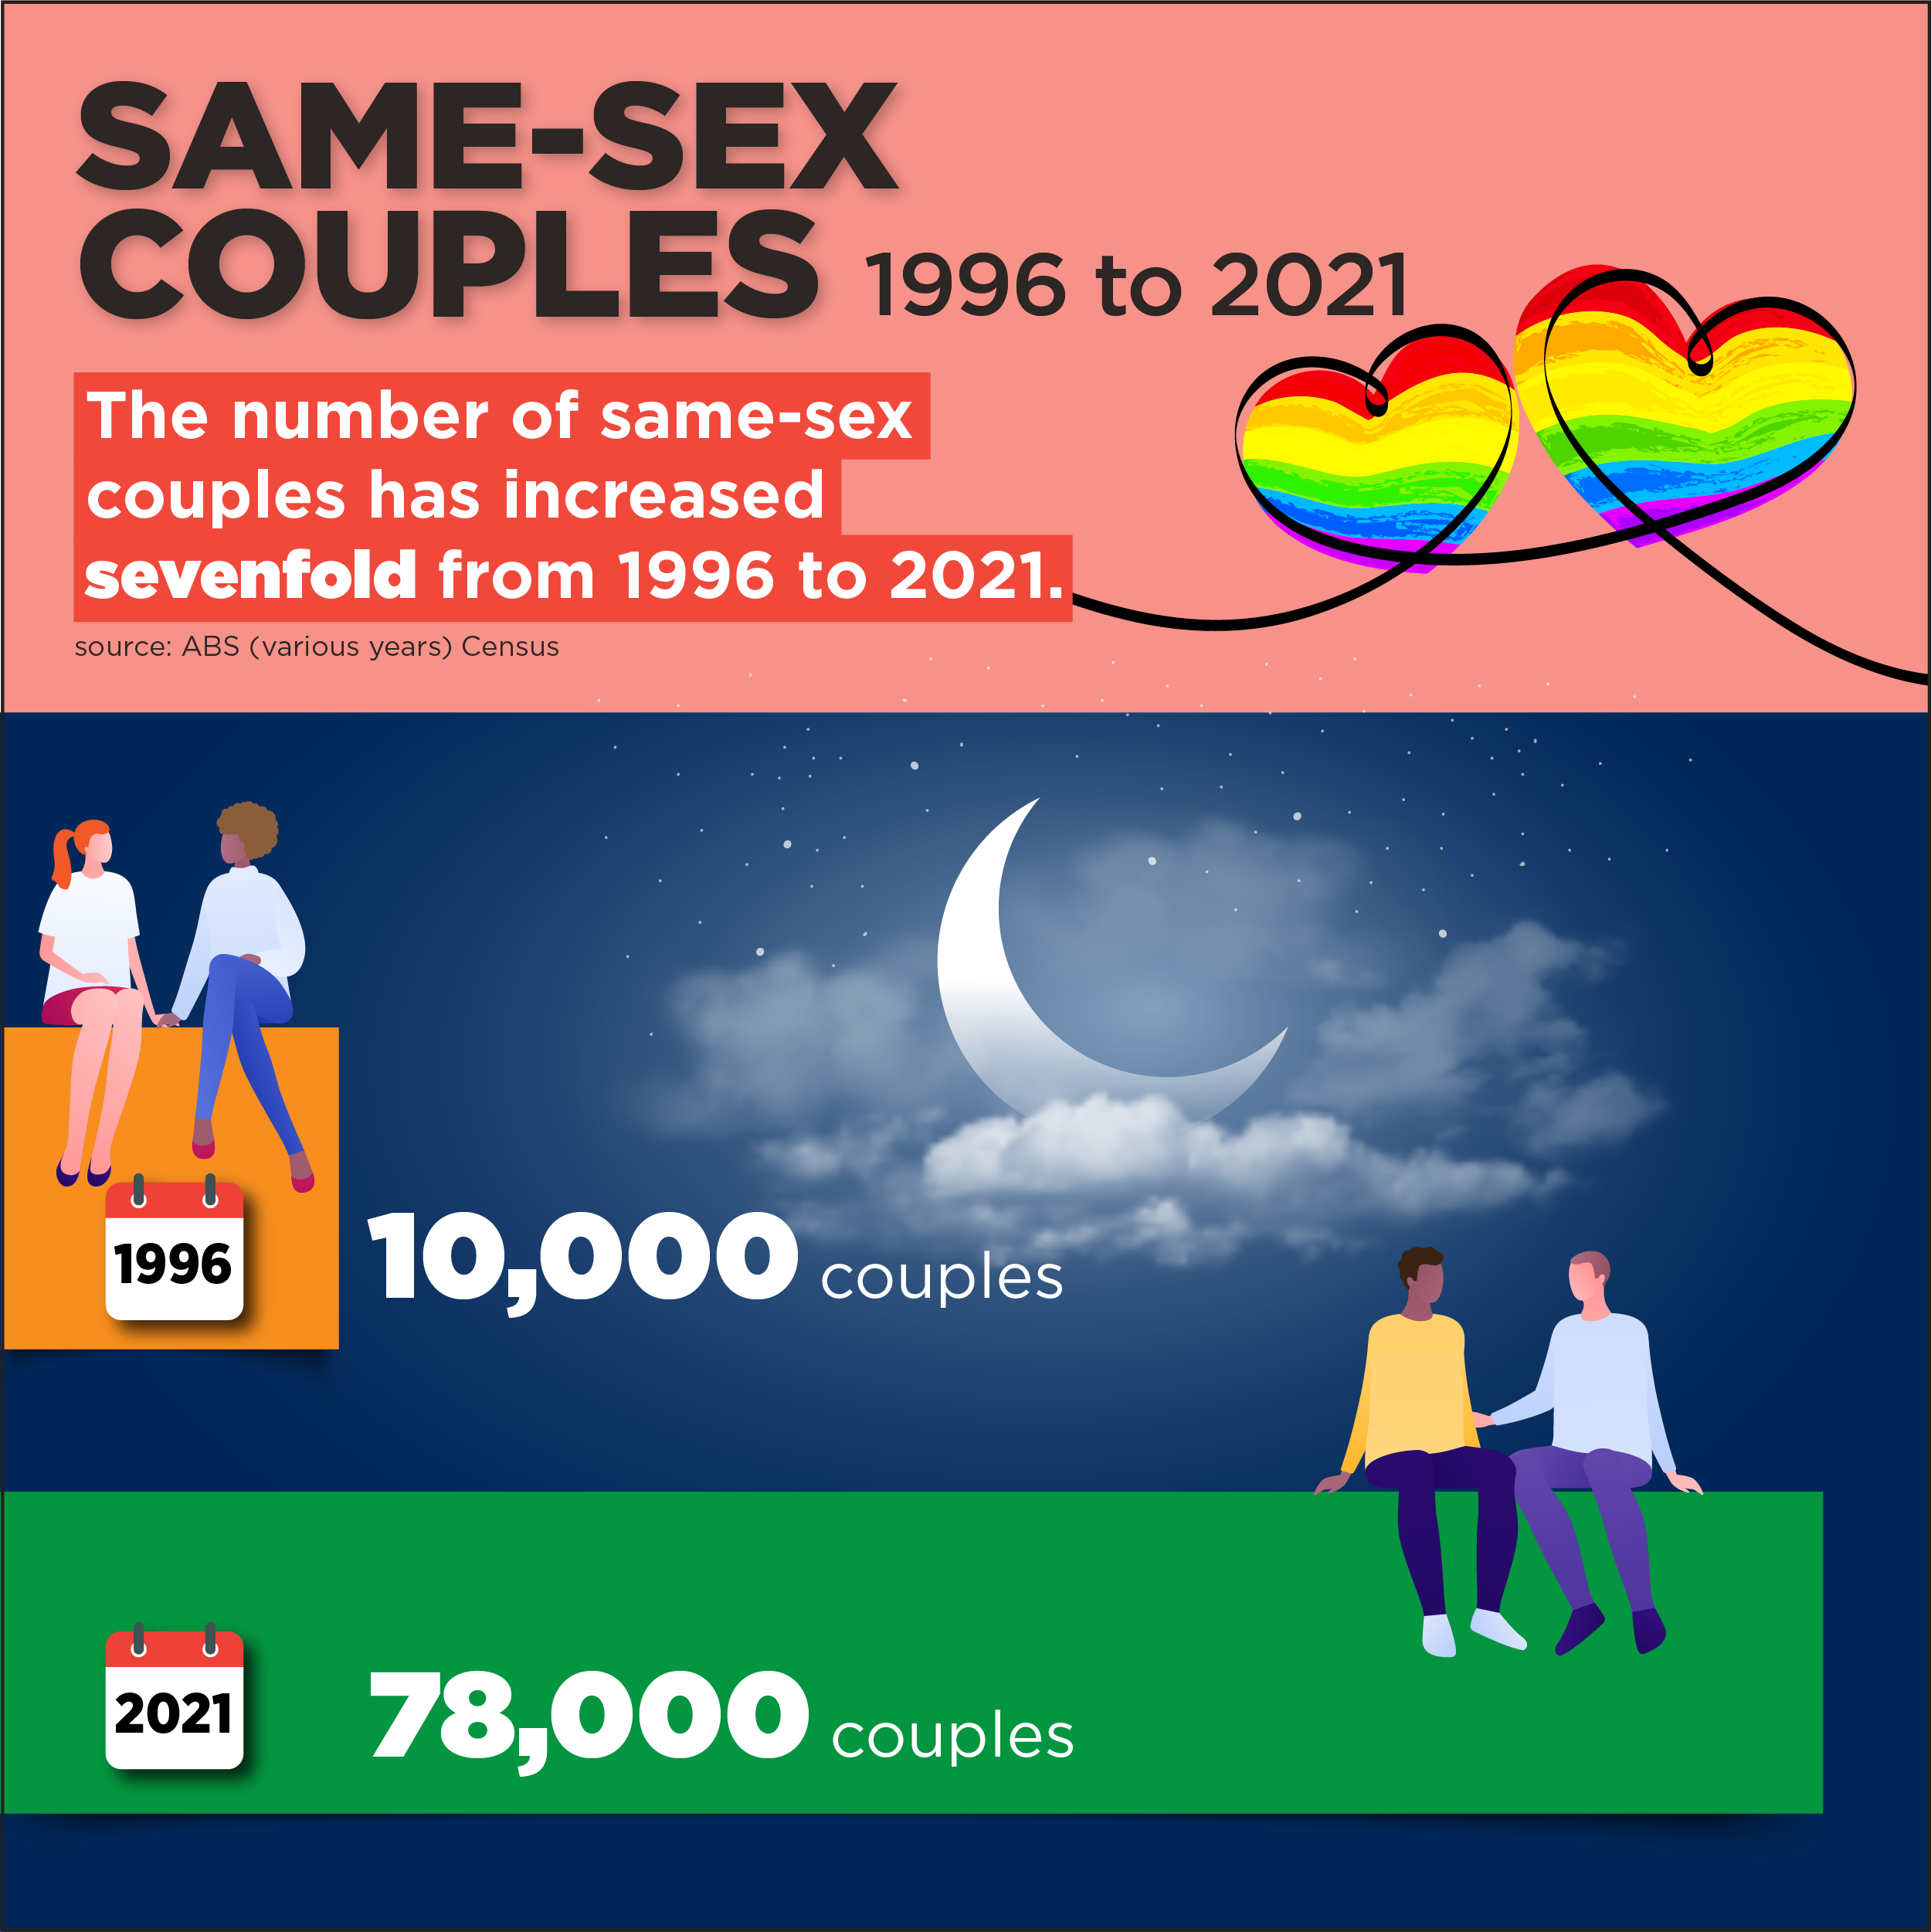 Infographic: Same-sex couples (1996-2021). The number of same-sex couples has increased sevenfold from 1996 to 2021. Source: ABS (various years) Census. 1996: 10,000 couples. 2021: 78,000 couples. 